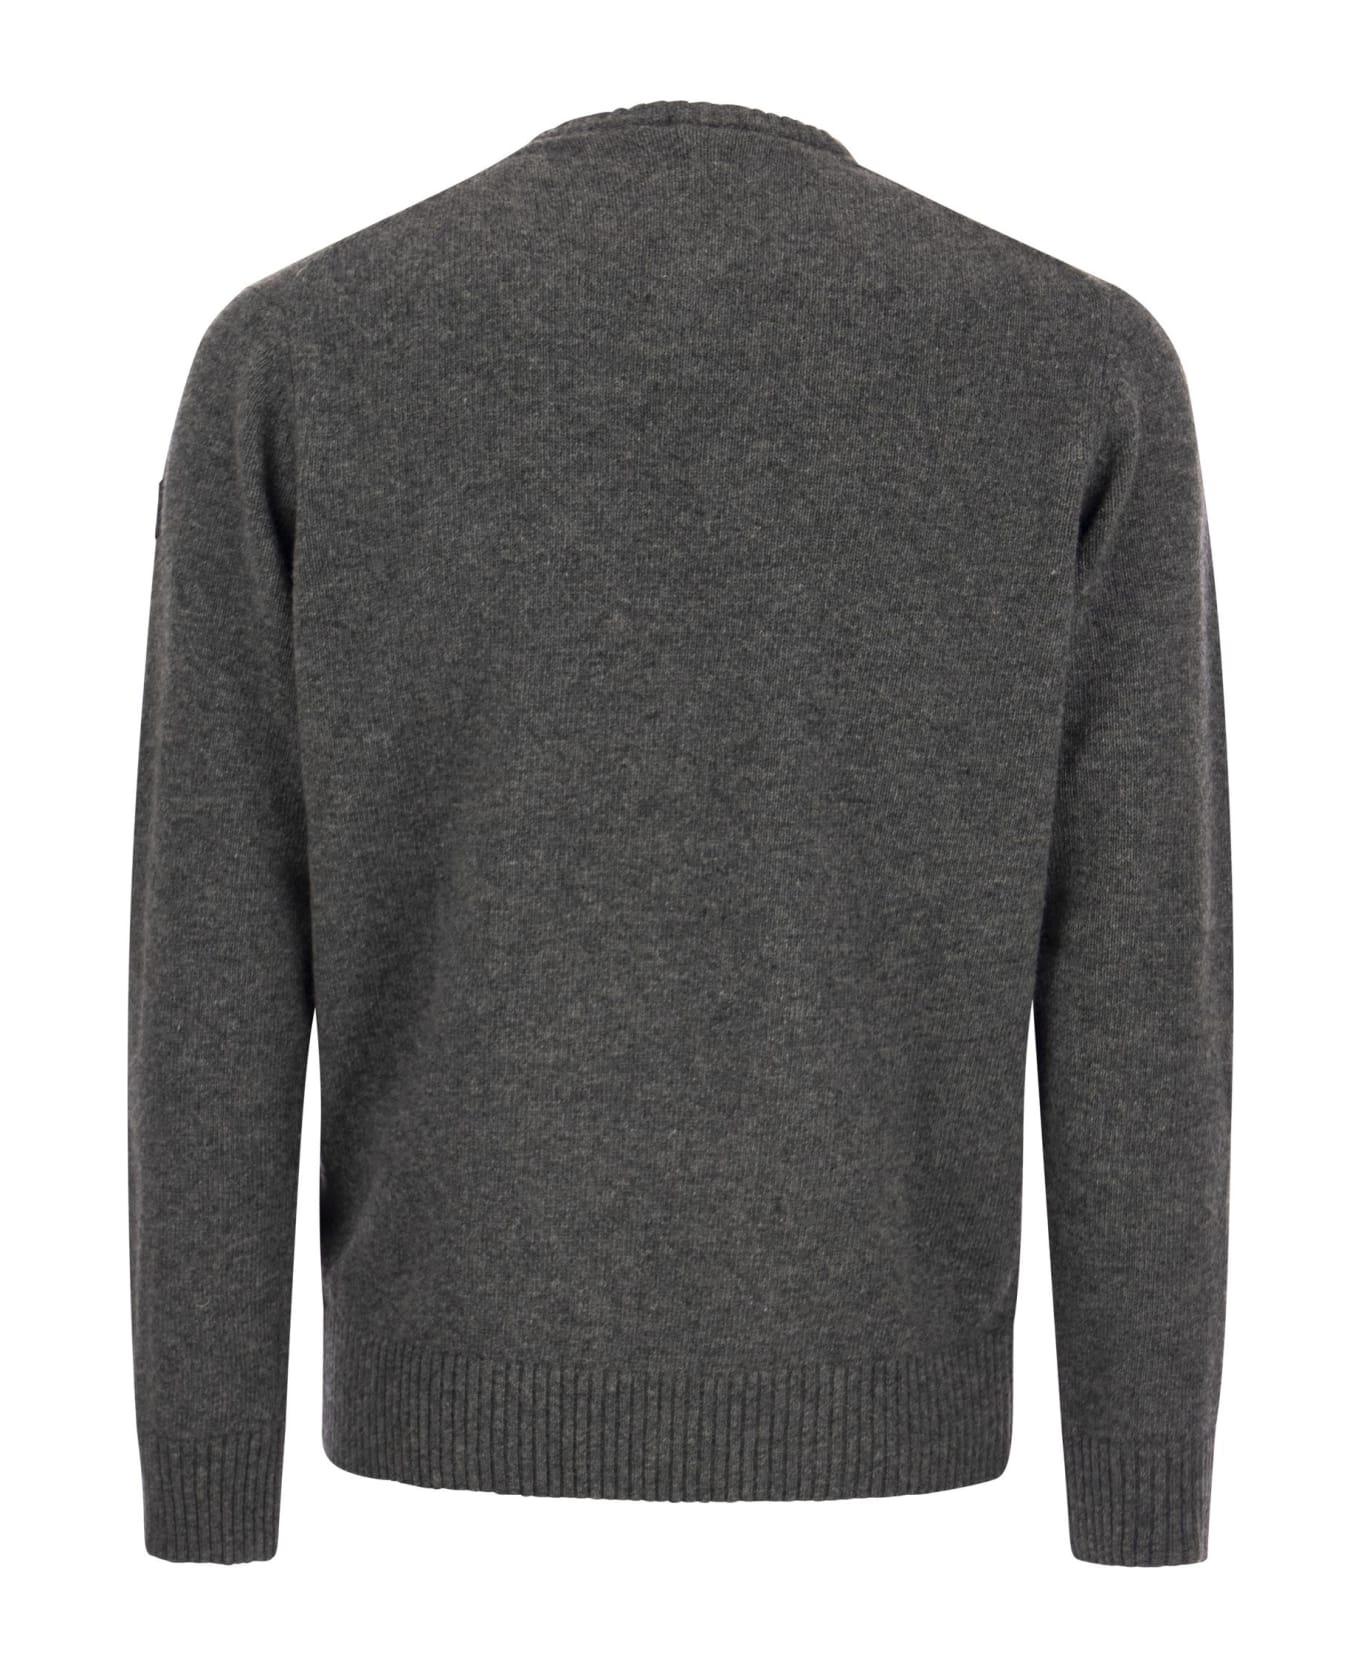 Paul&Shark Wool Crew Neck With Arm Patch - Grey